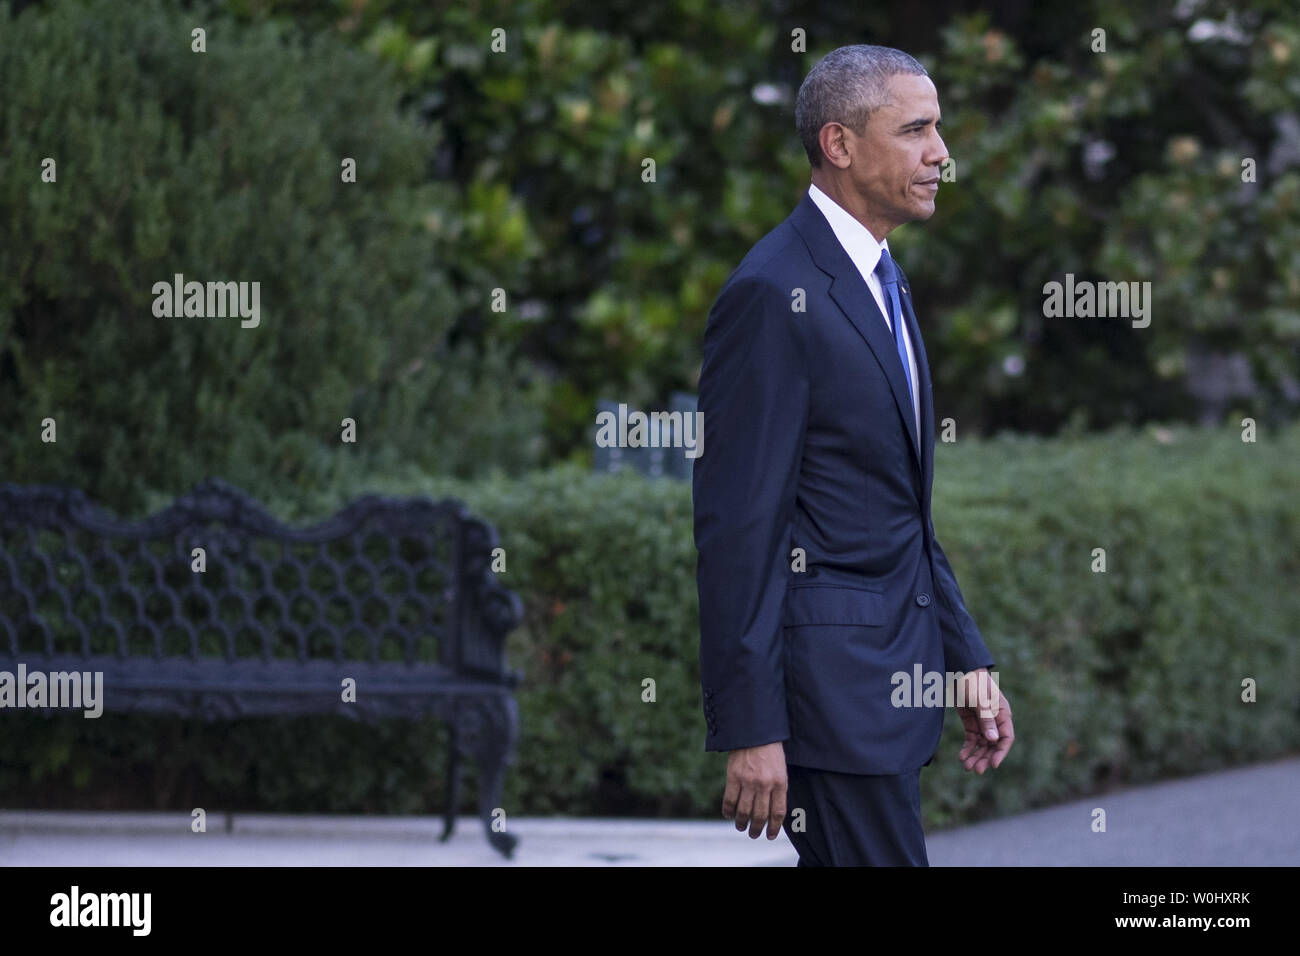 President Barack Obama makes his way from the residence to Marine One on the South Lawn of the White House on July 23, 2015 in Washington, D.C. as he departs for a trip to Ethiopia and Kenya, homeland of his father. Obama arrives in Kenya Friday, where he will attend the Global Entrepreneurship Summit in Nairobi. He will become the first American president to visit Ethiopia. Photo by Pete Marovich/UPI Stock Photo